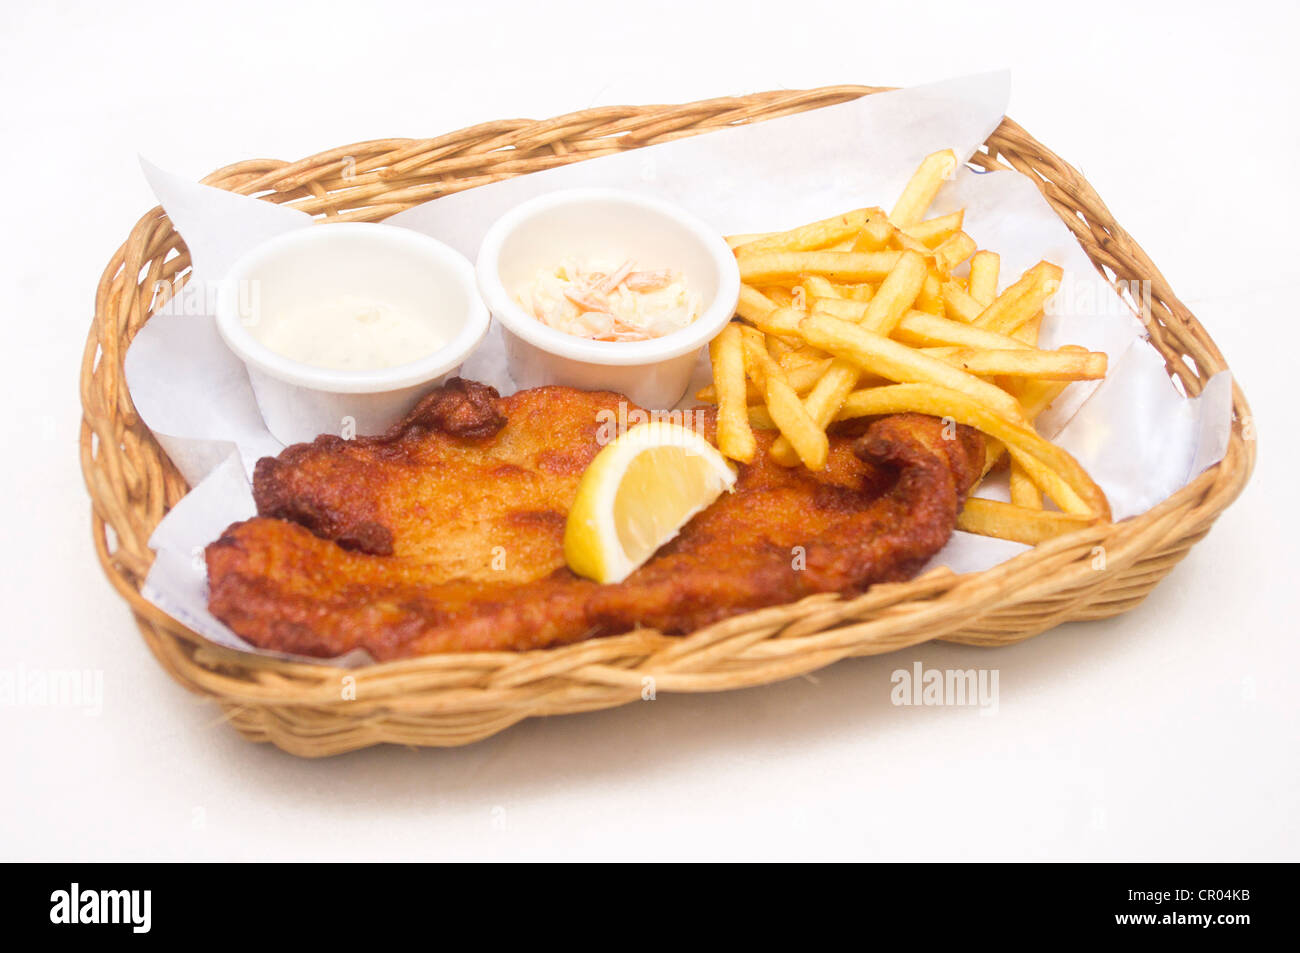 Fish And Chips mit DIP-Sauce. Clipping-Pfad ist in Jpg. Stockfoto